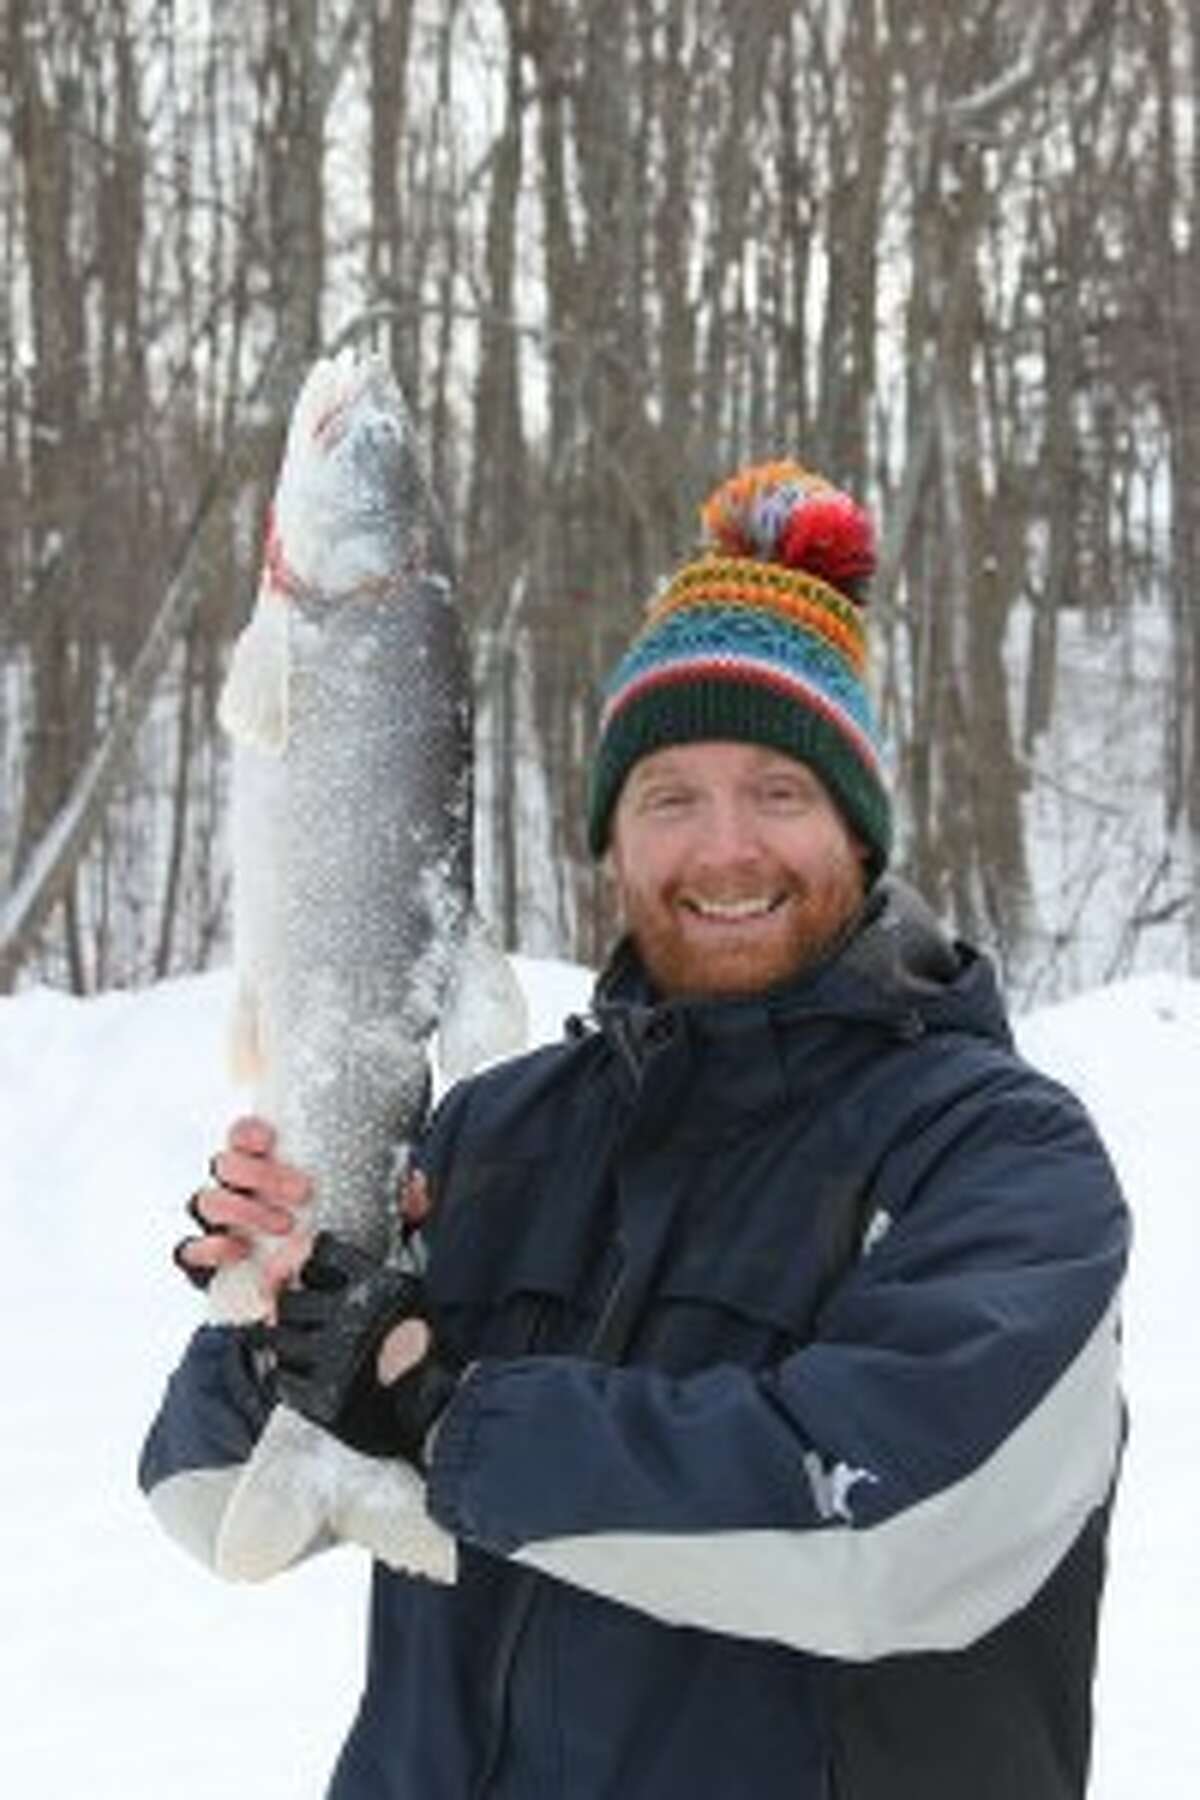 Jordan Bates wields the 8.2 pound lake trout he caught with fishing partner Alex Brydges.